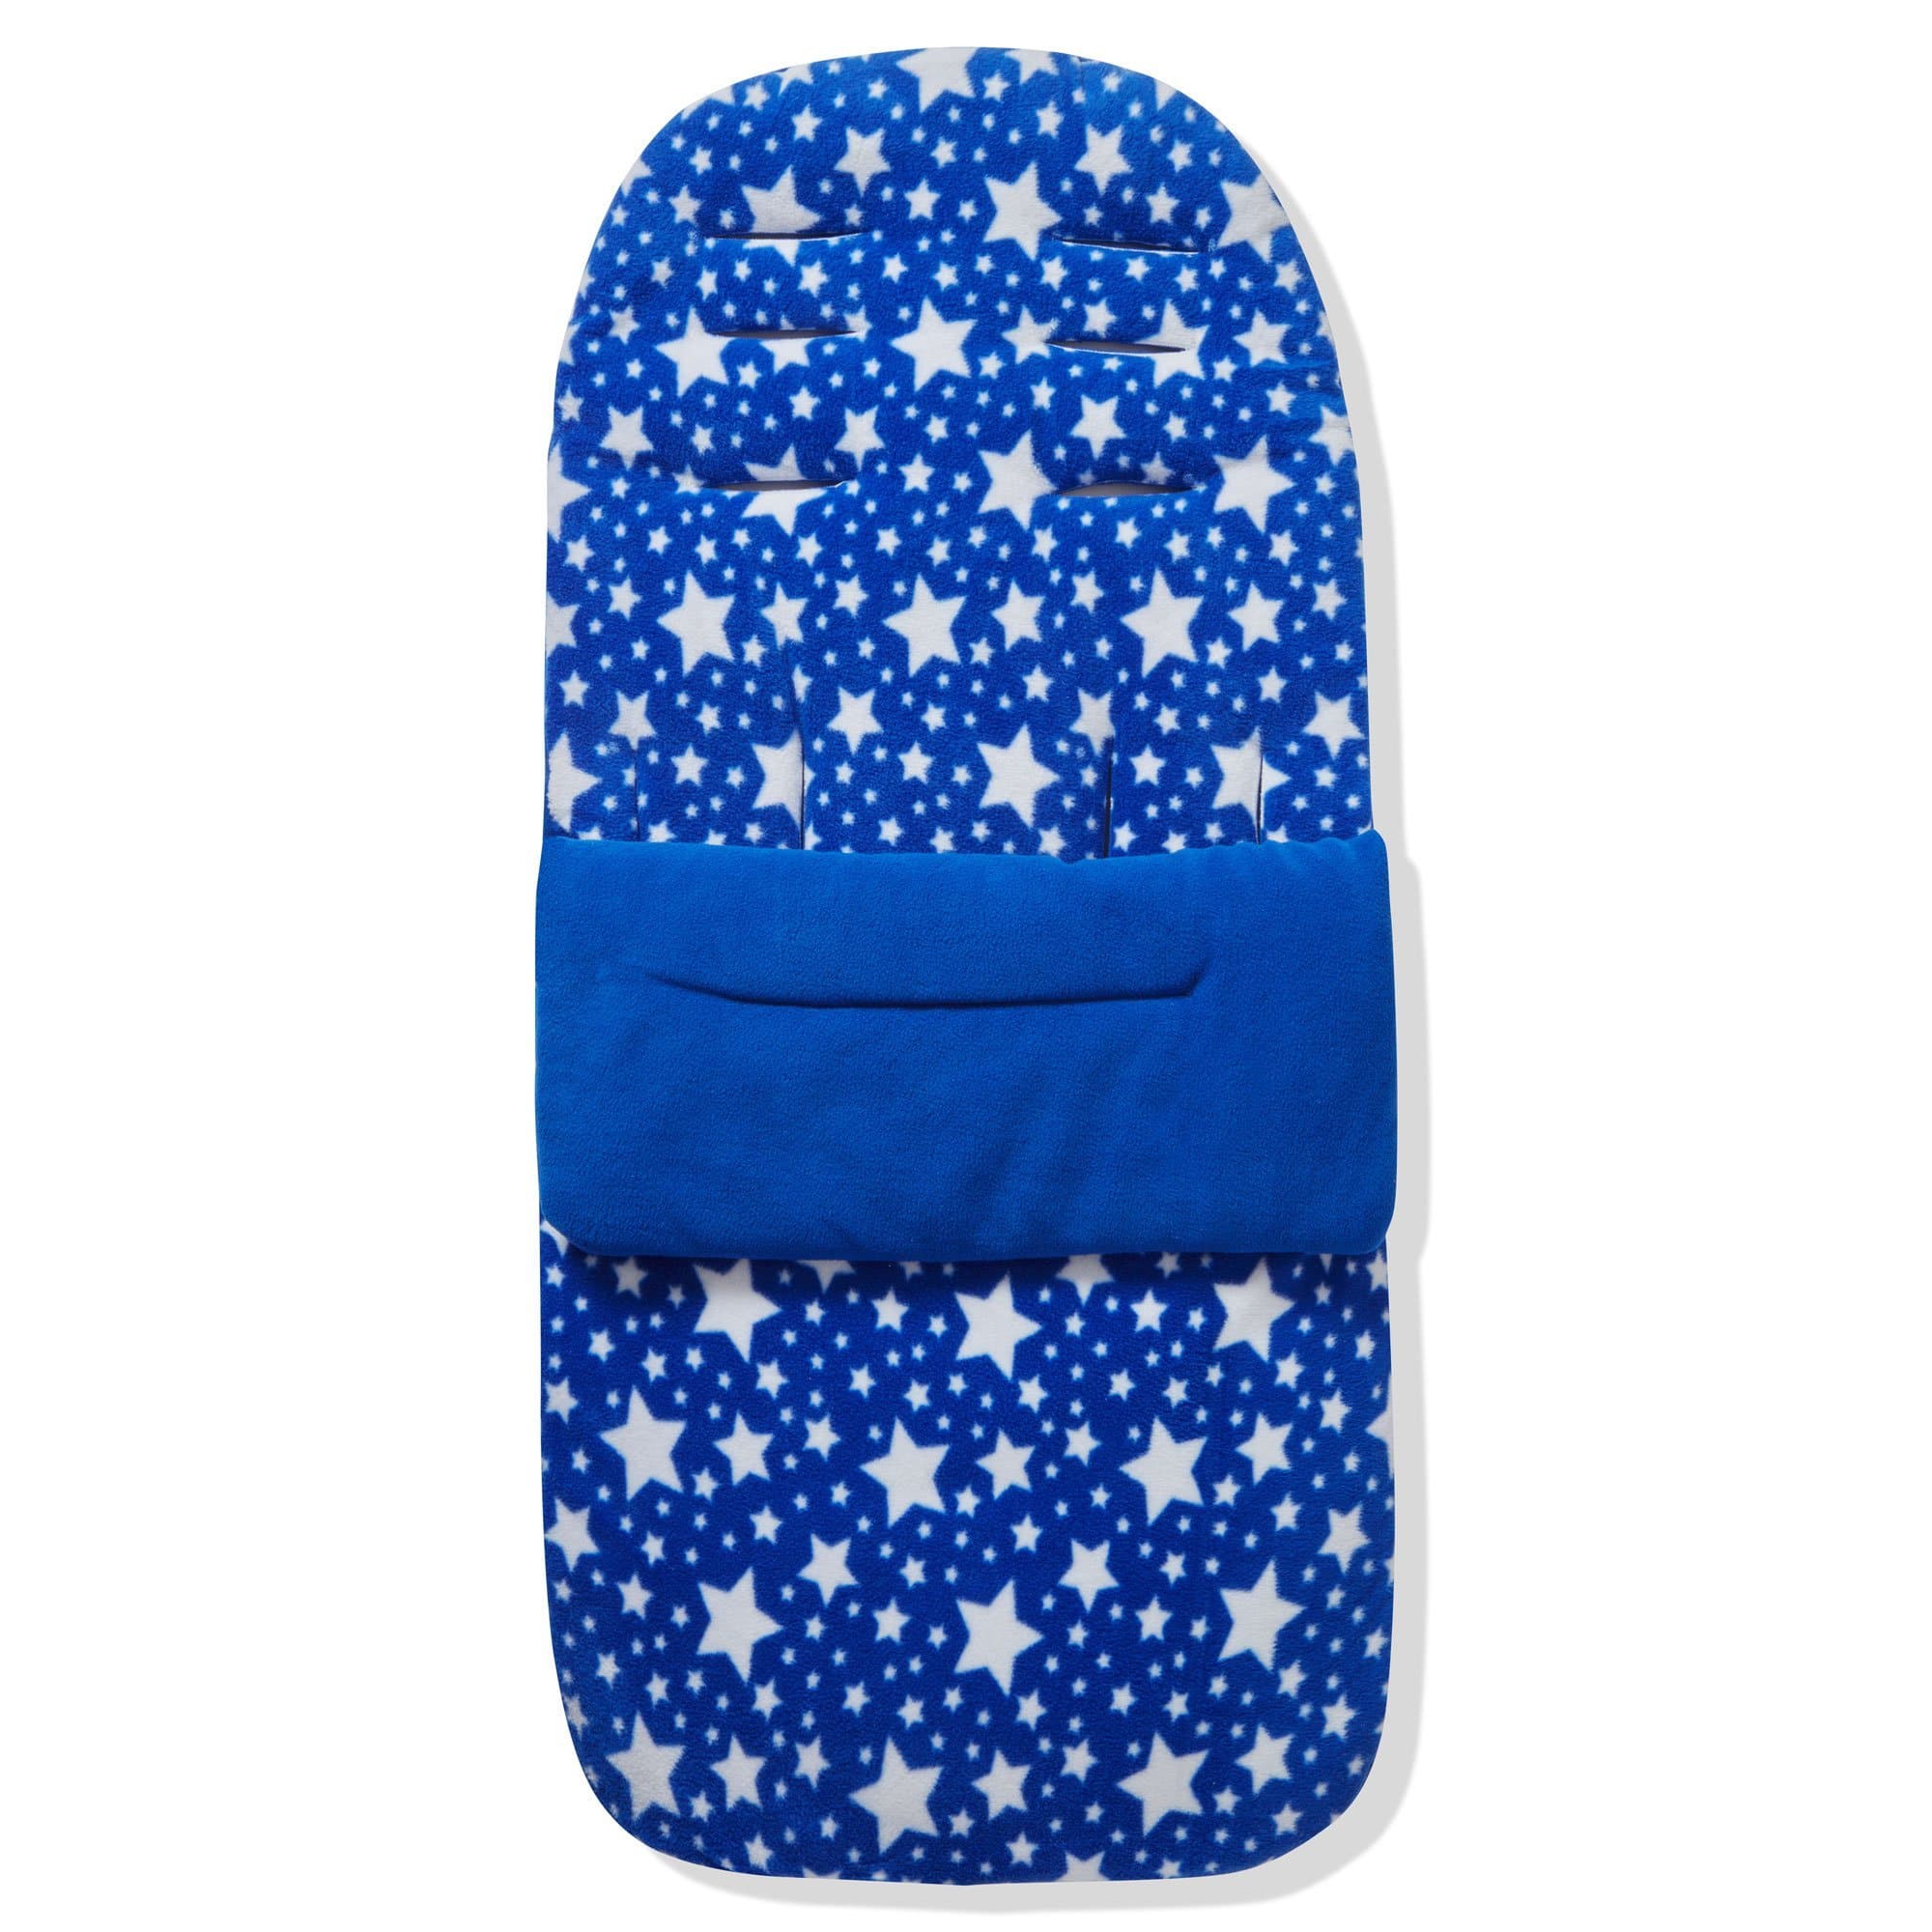 Fleece Footmuff / Cosy Toes Compatible with Maxi Cosi - Blue Star / Fits All Models | For Your Little One